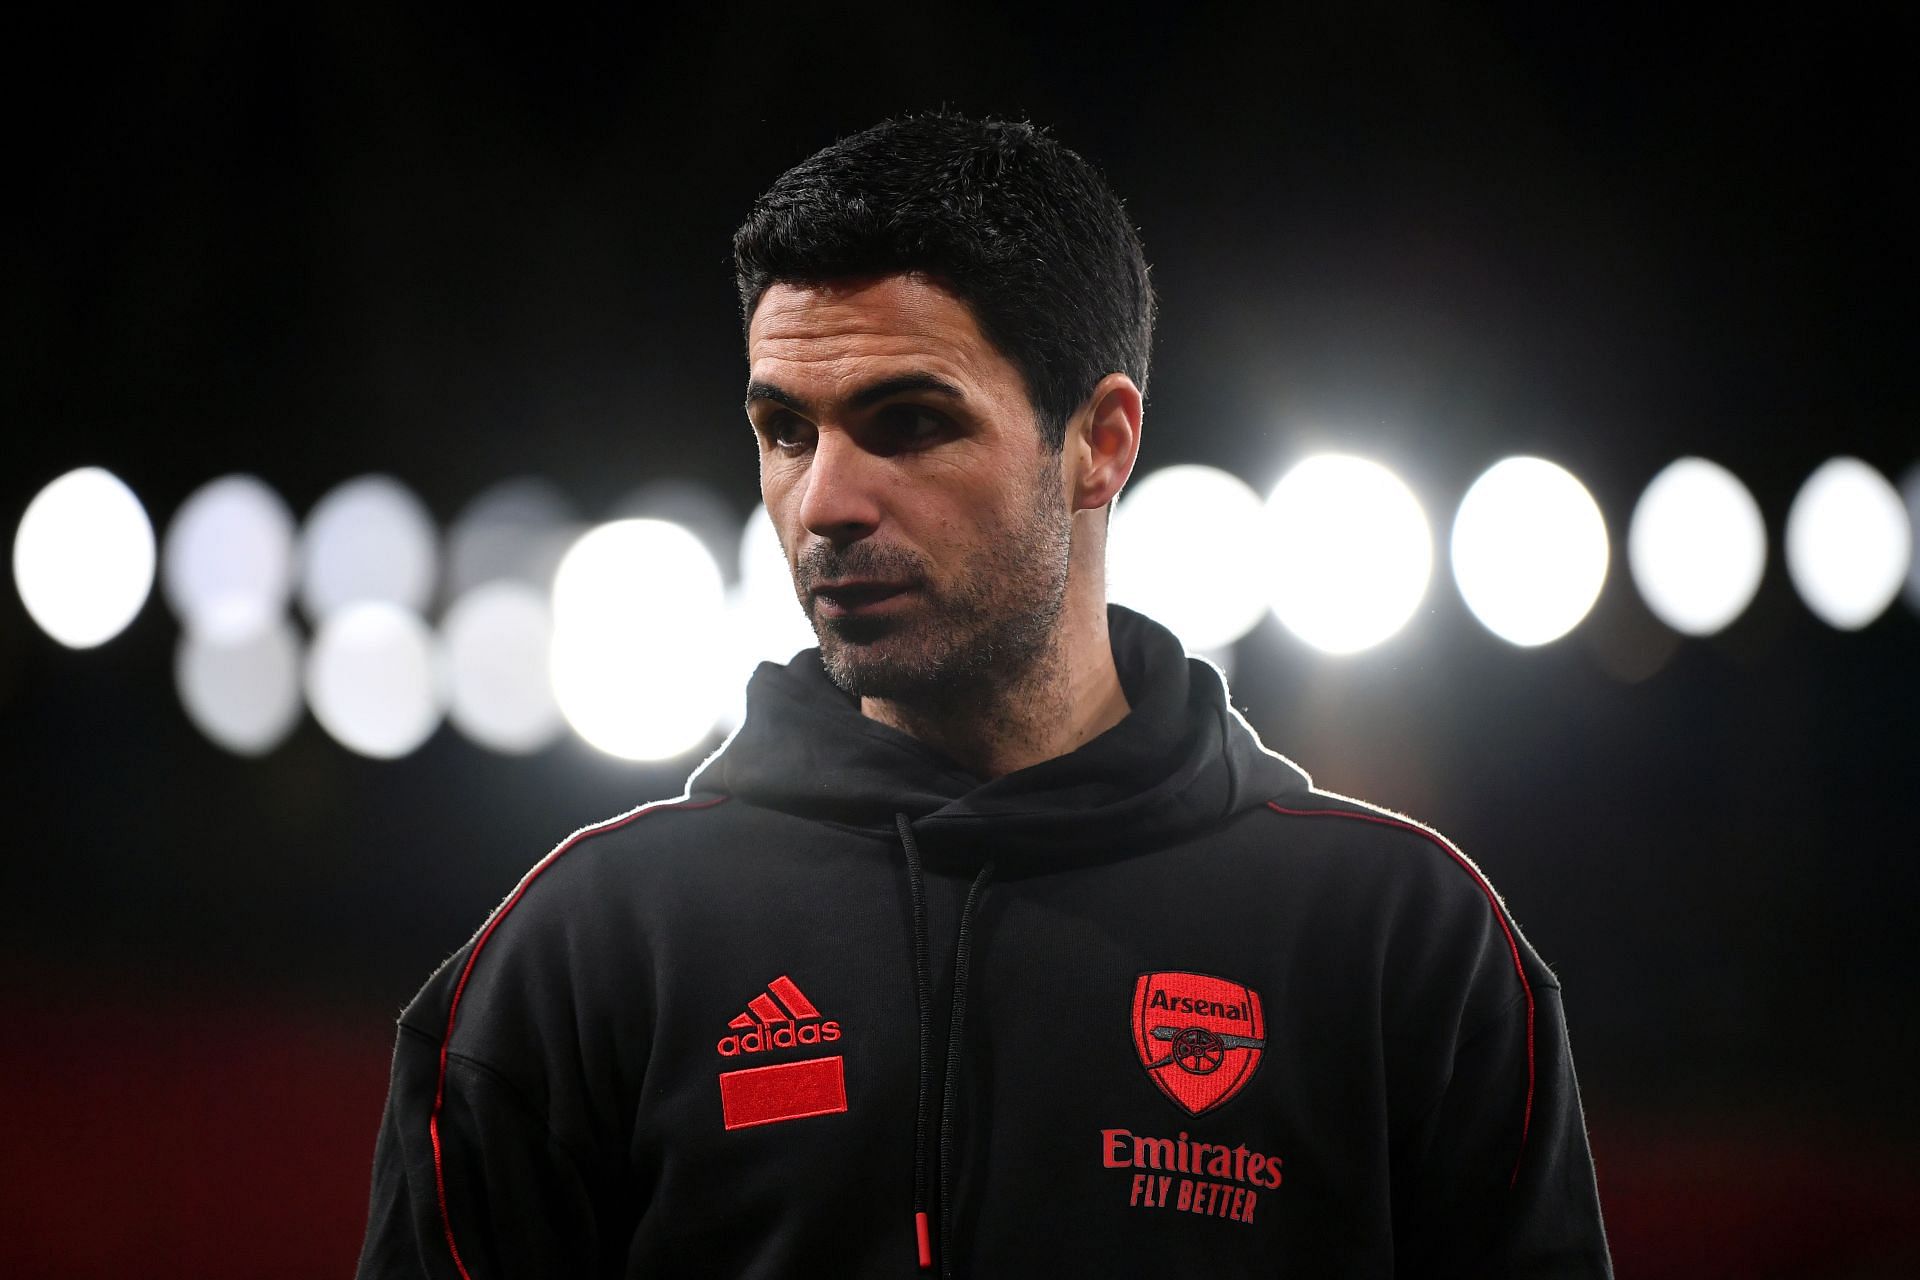 Arsenal manager Mikel Arteta has overseen a tremendous turnaround at the Emirates.